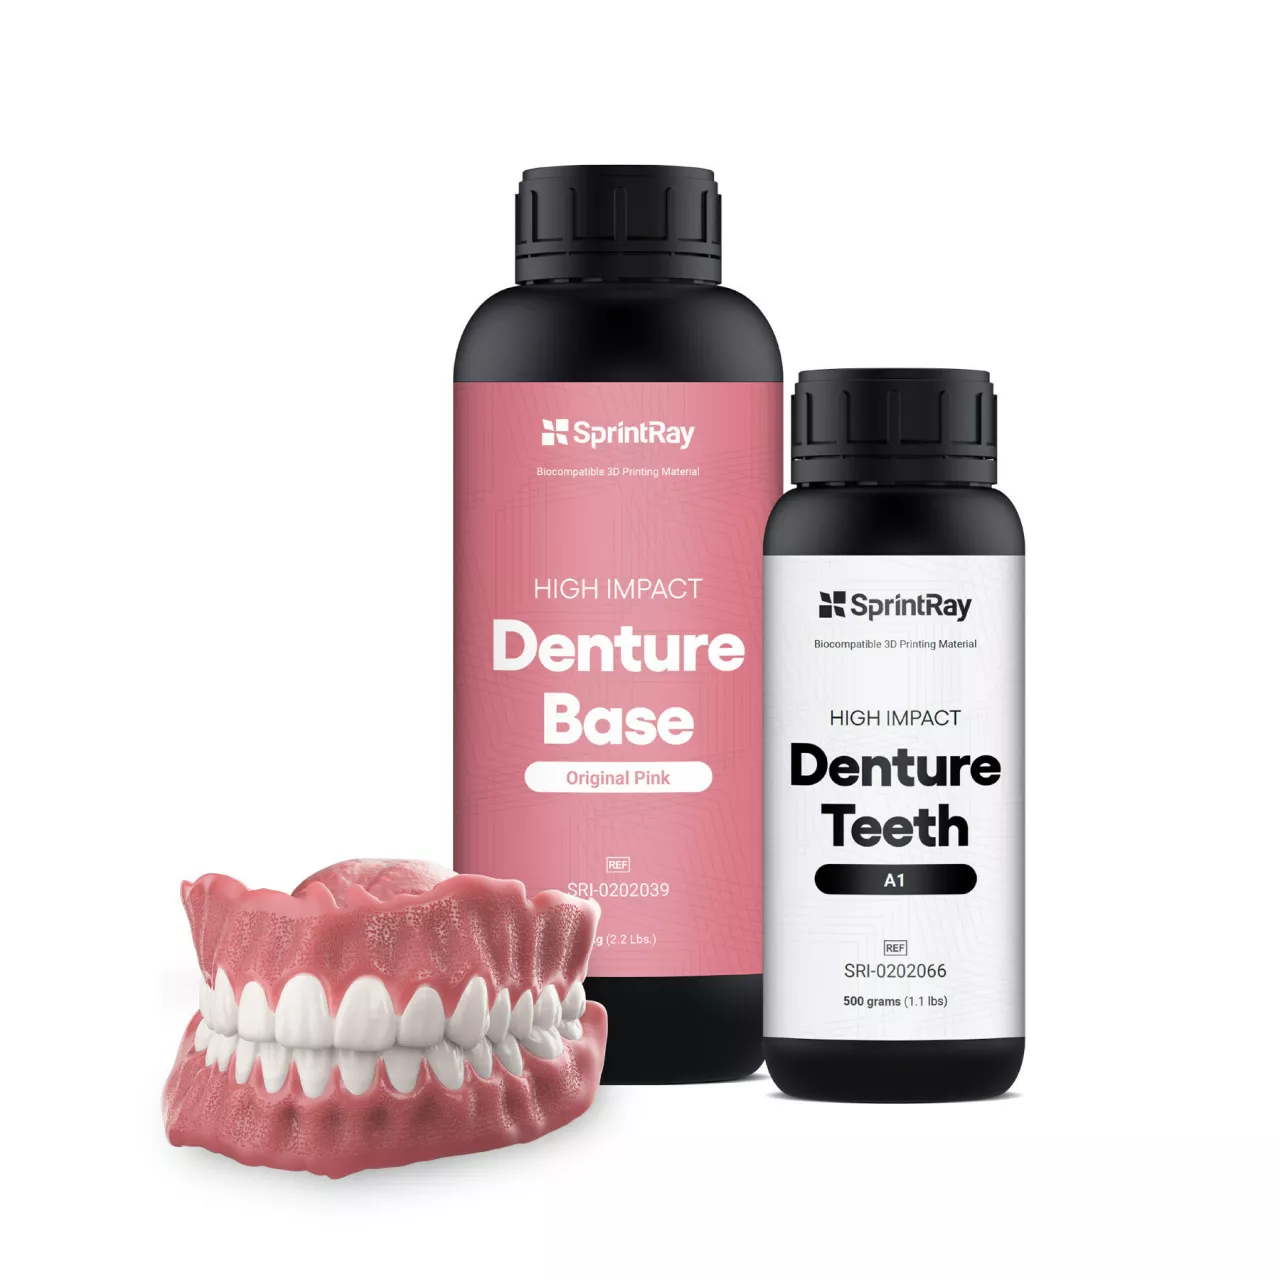 SprintRay Launches Ceramic-Infused 3D Printing Resins for High Performance Dentures img#3